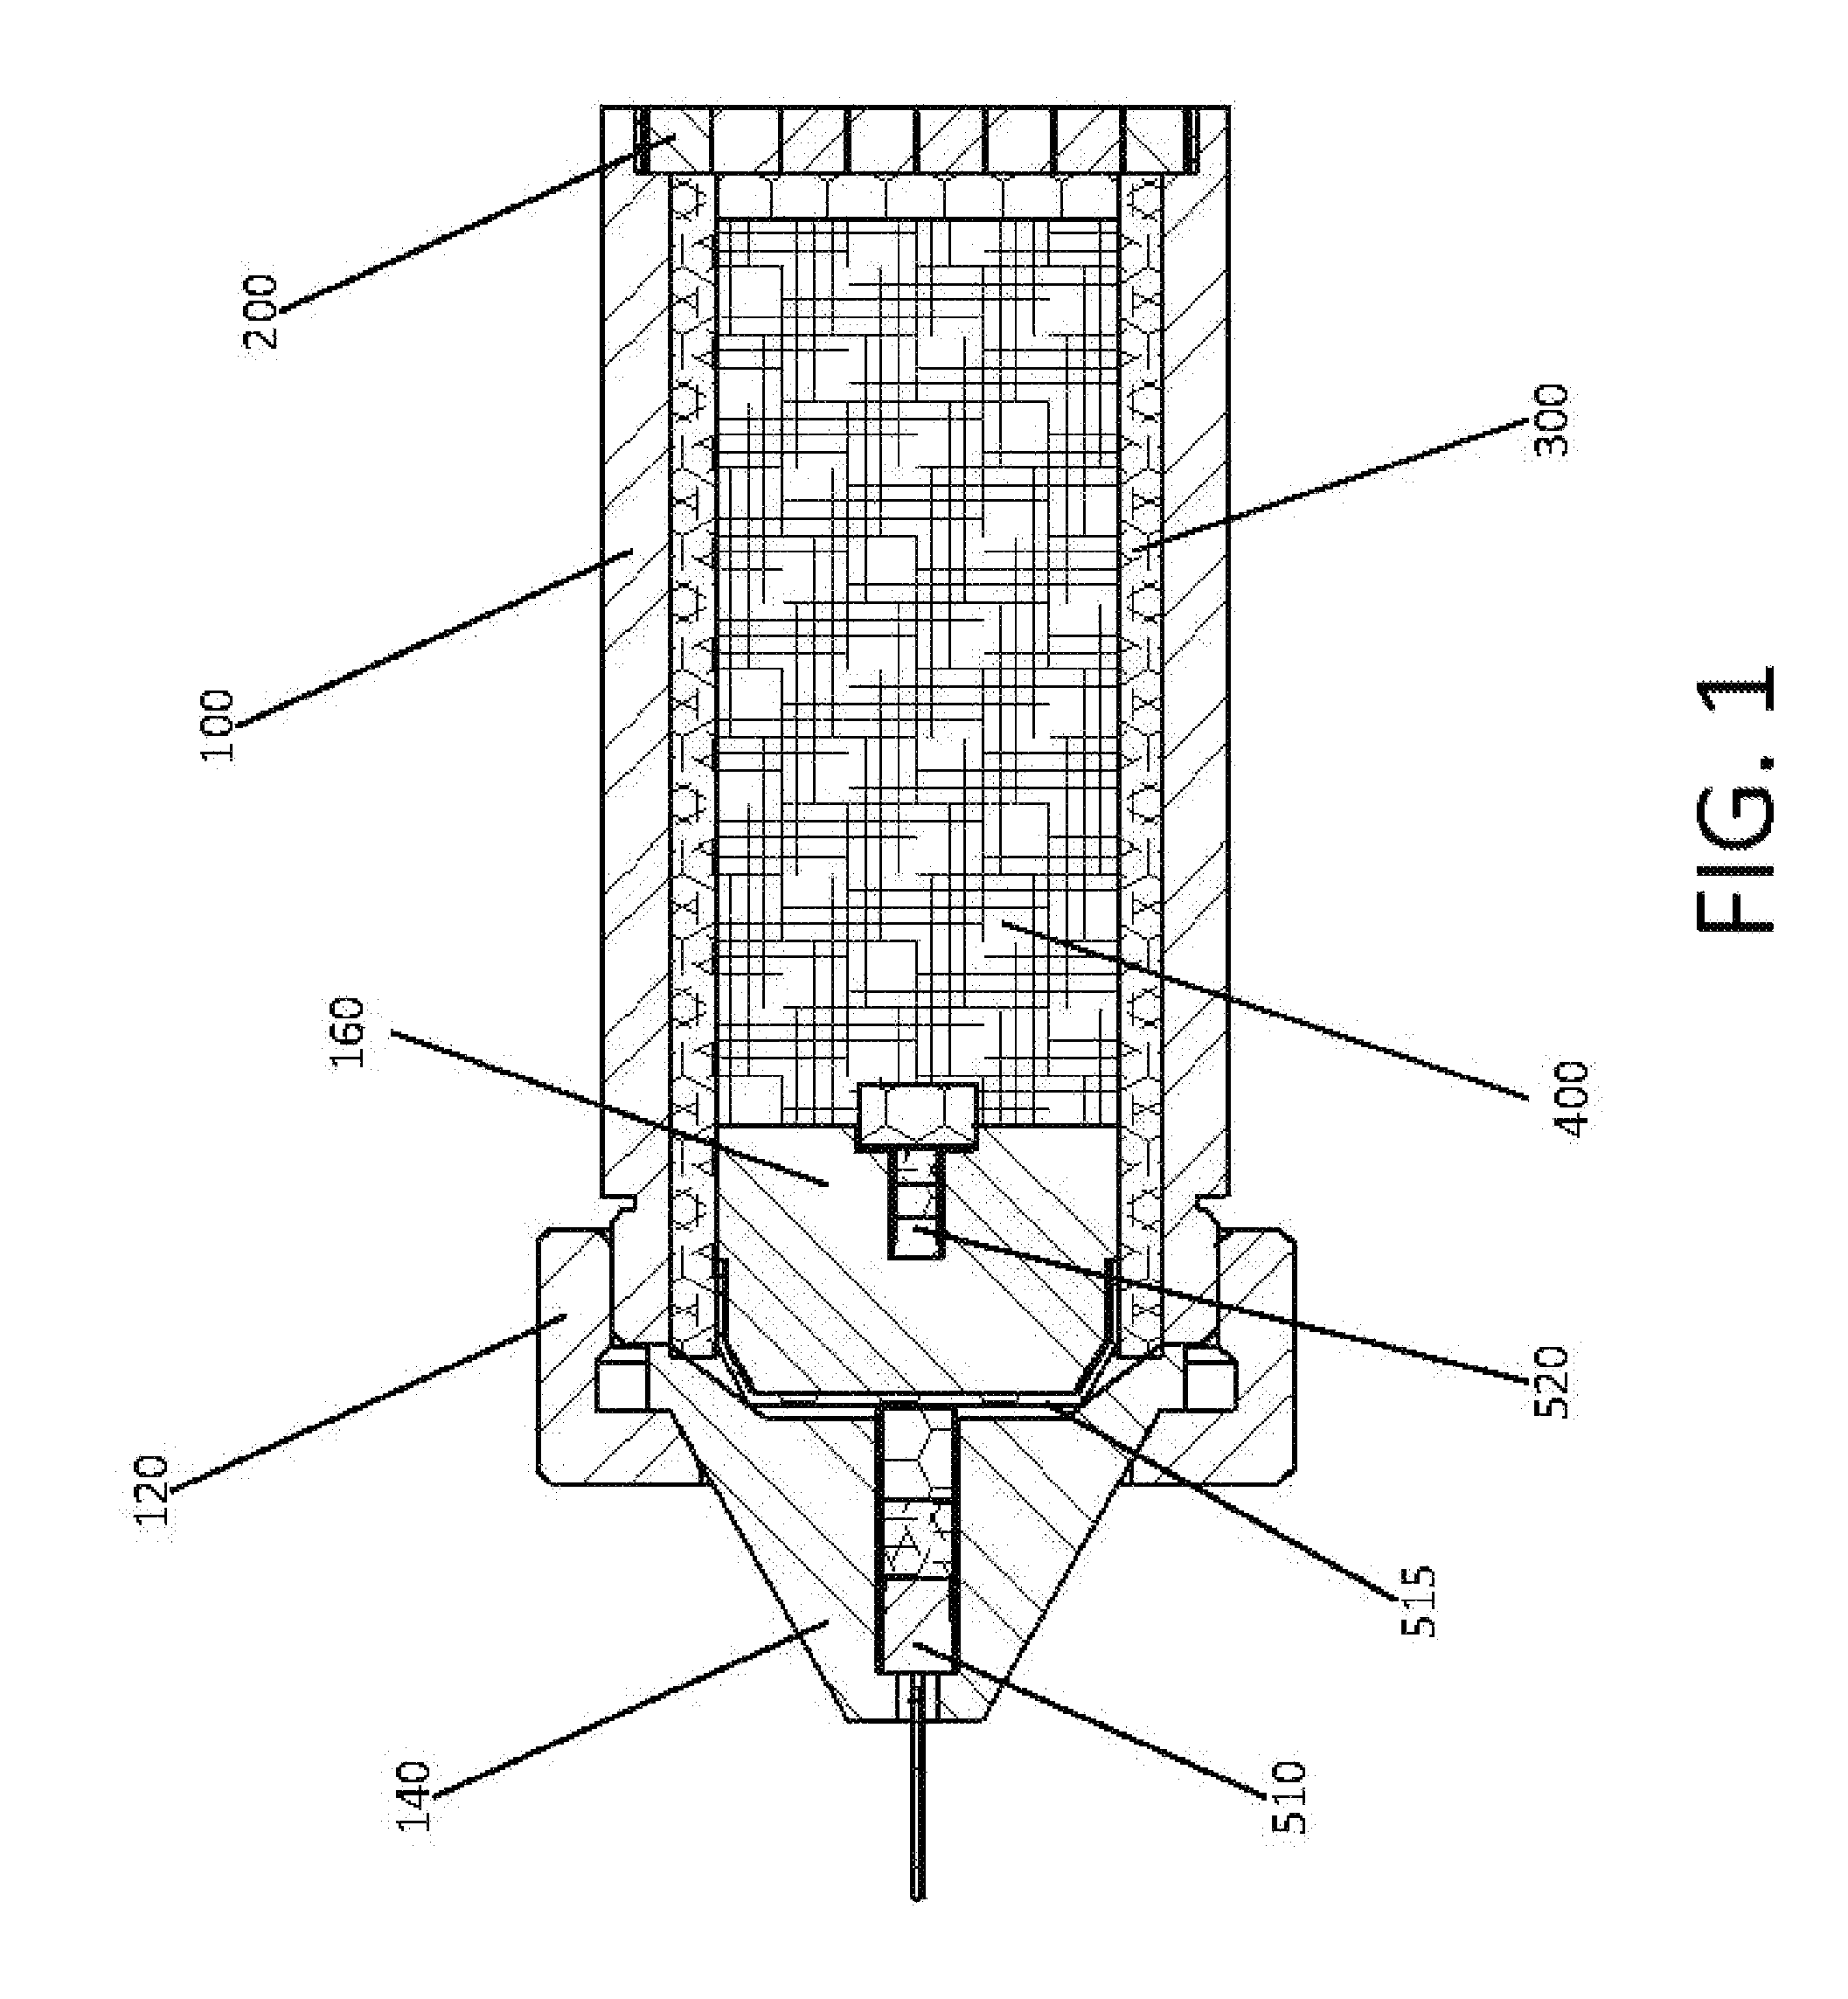 Selectable lethality, focused fragment munition and method of use